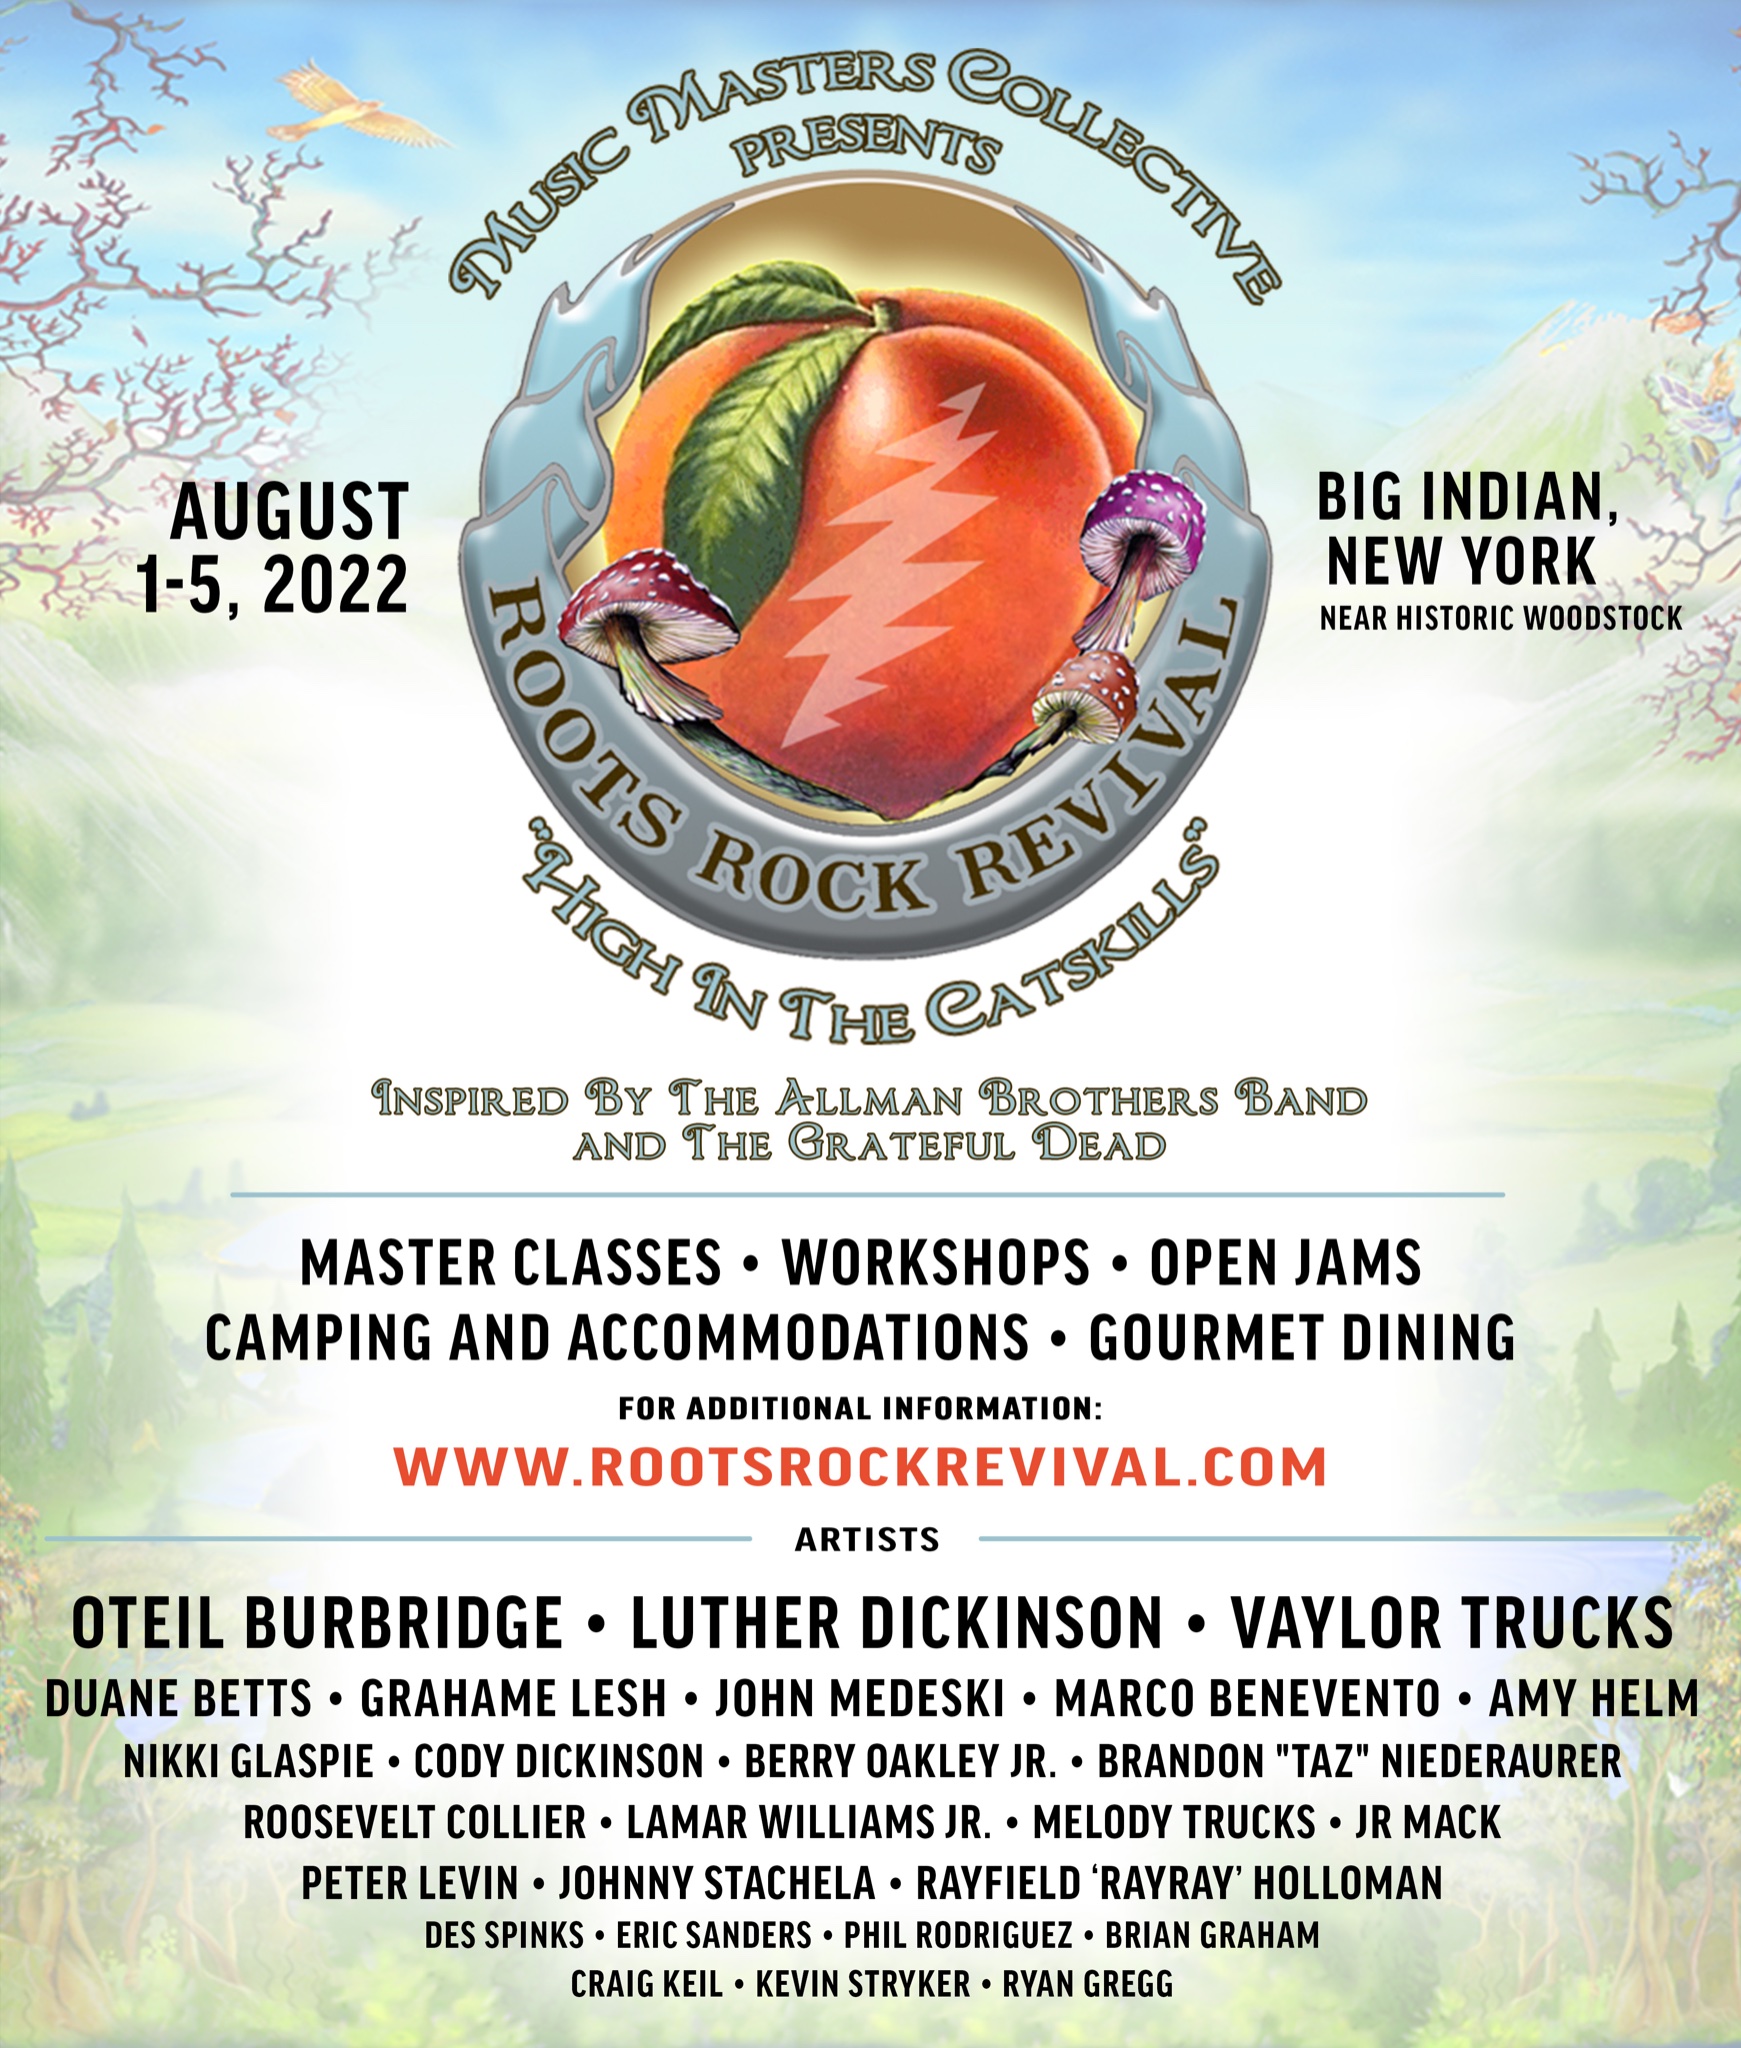 Roots Rock Revival Music Festival; August 1-5, 2022; Big Indian, NY